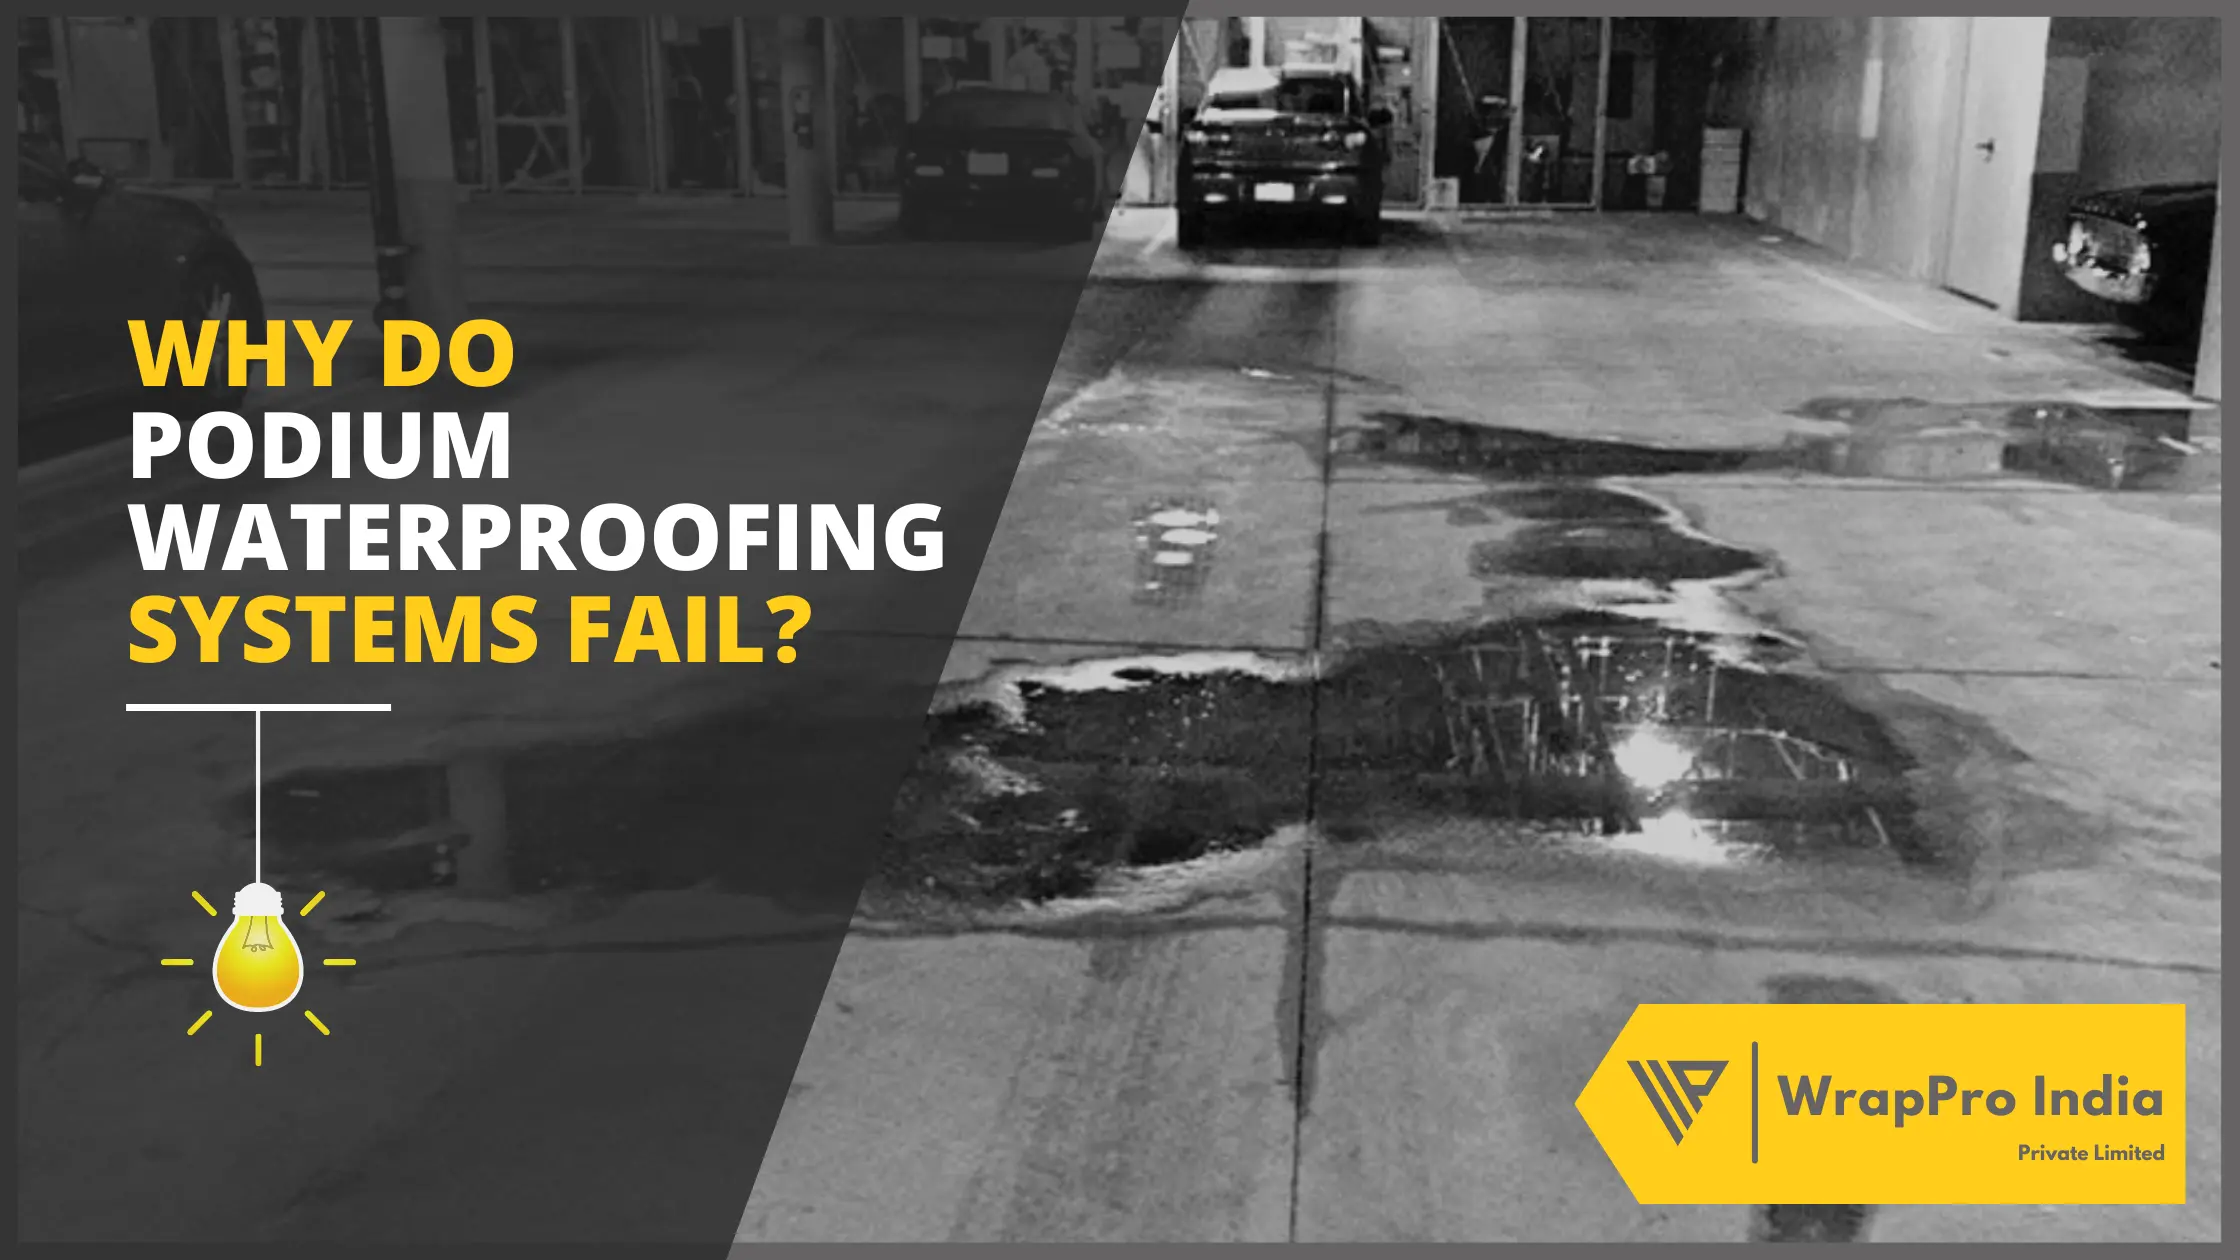 Why do Podium Waterproofing Systems Fail?